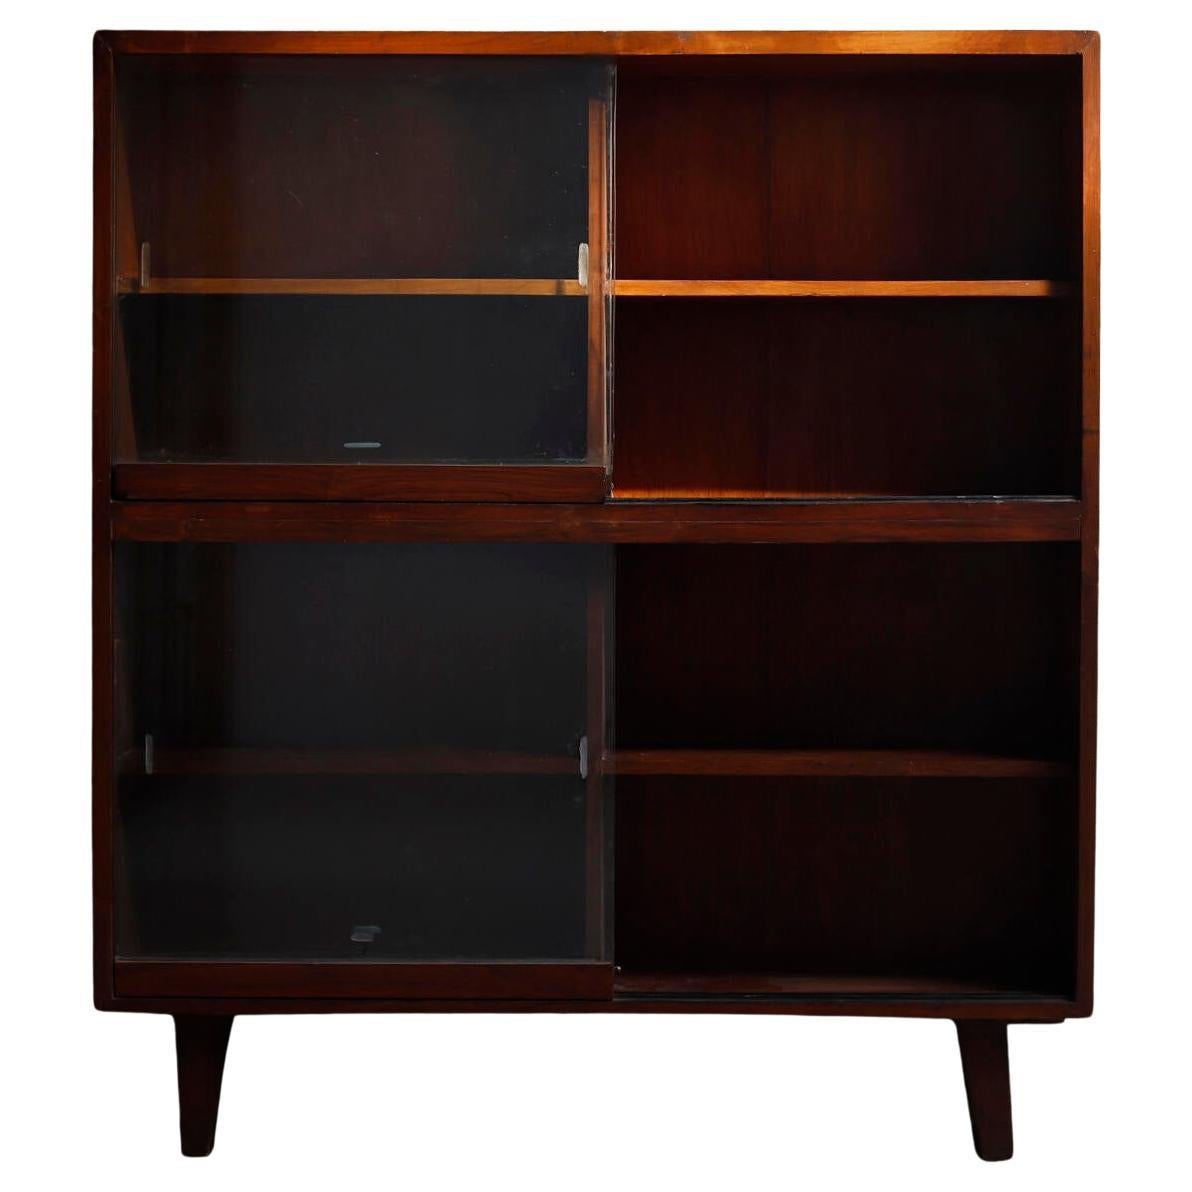 Pierre Jeanneret Glass Fronted Bookcase For Sale